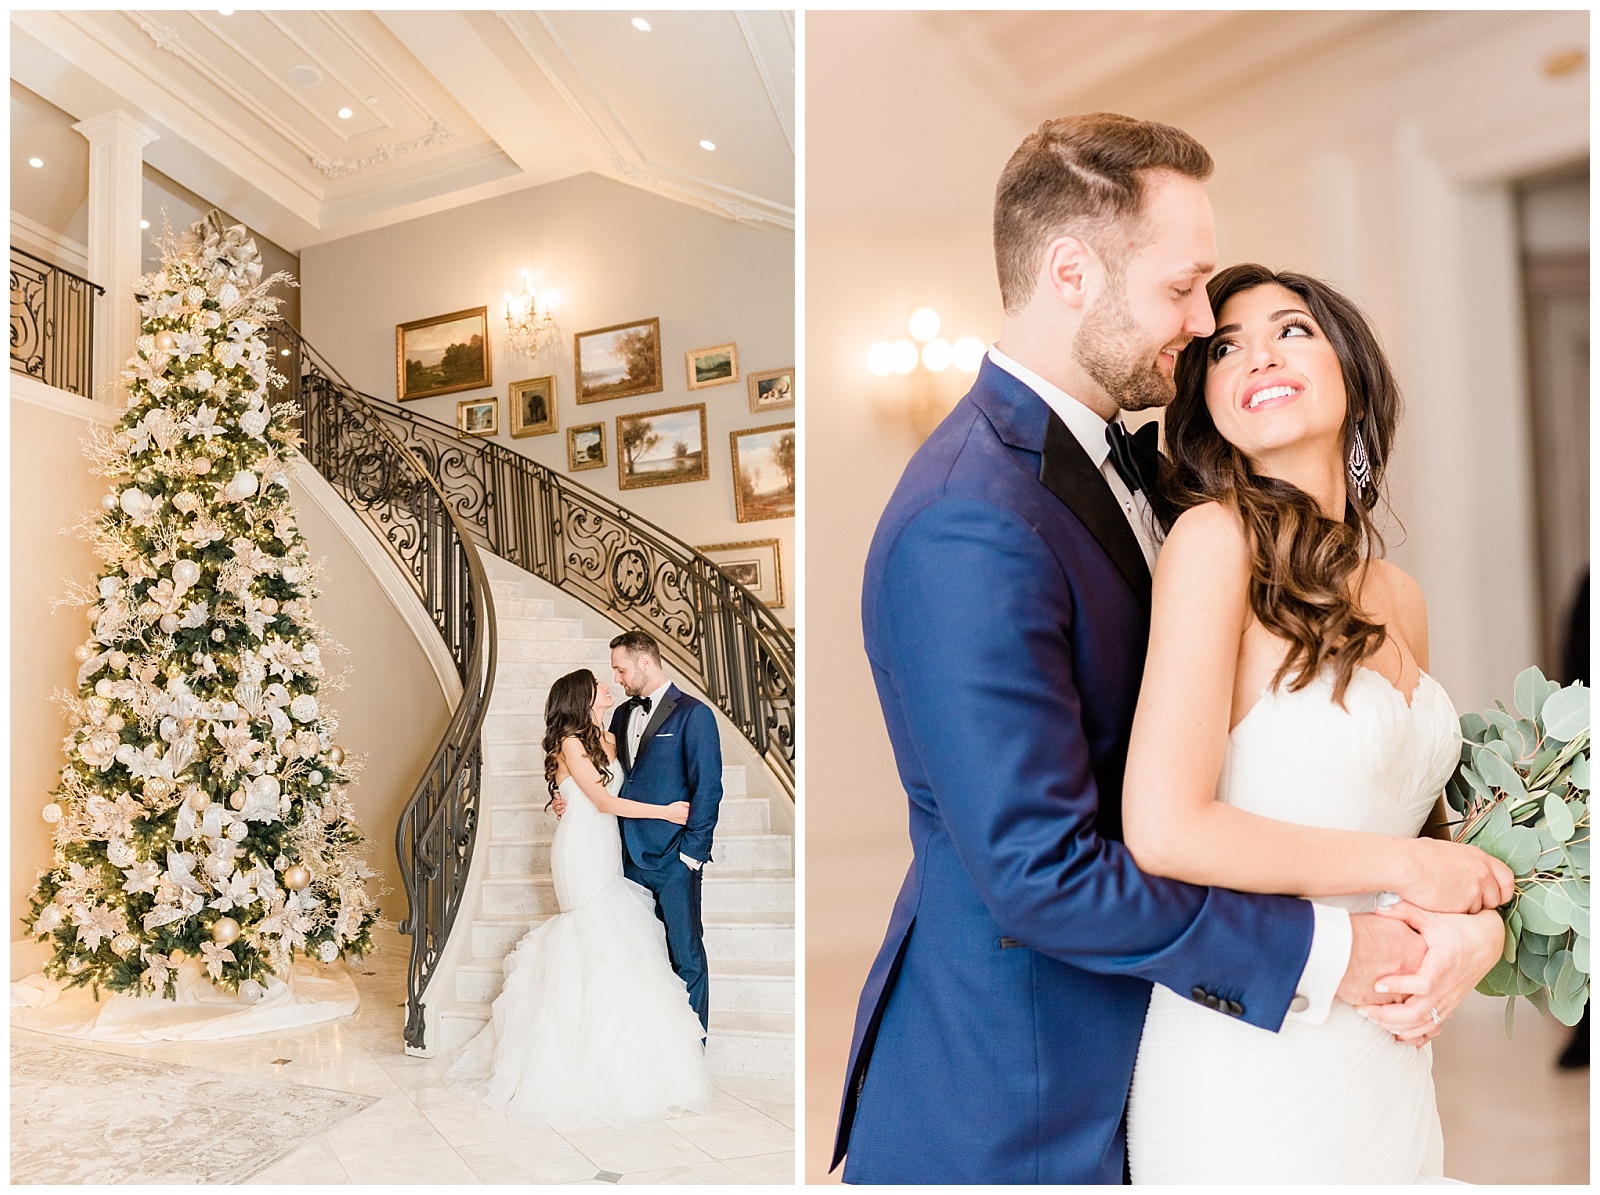 Park Chateau Wedding, Photographer, New Jersey, NJ, Winter, Bride and Groom Portraits, Light and Airy, Christmas Tree, Staircase